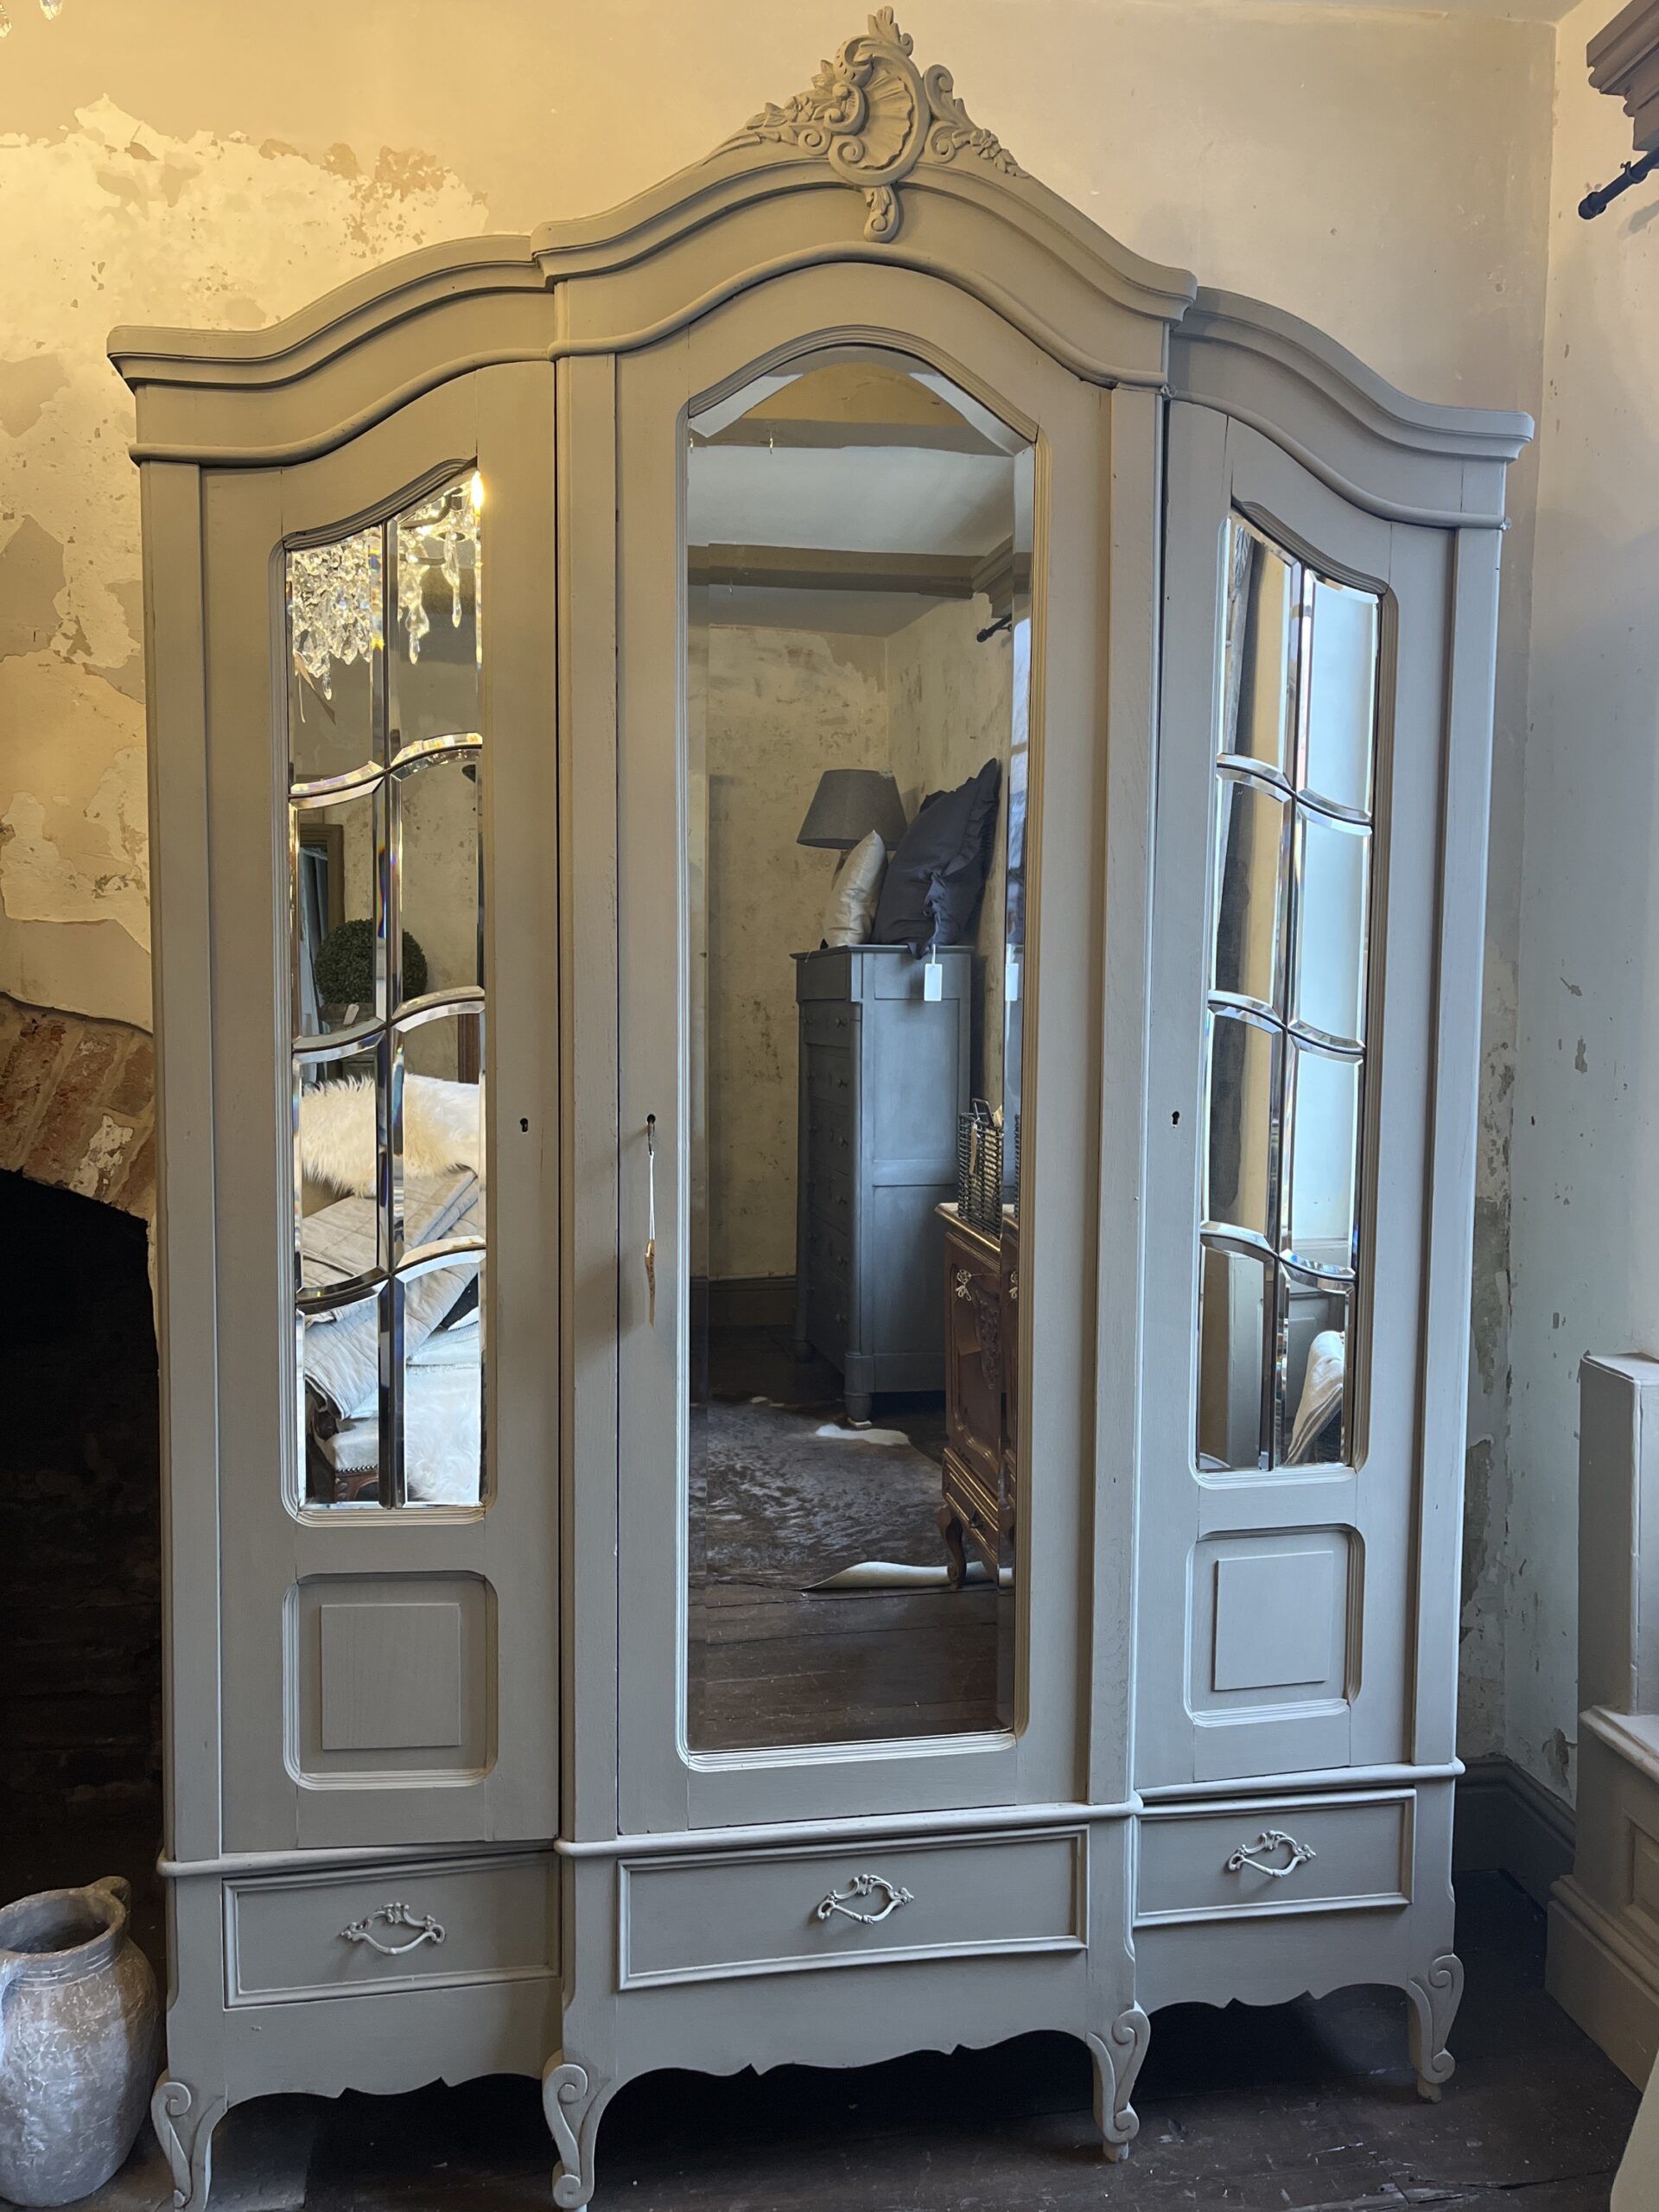 3 Door Louis Xv Painted Armoire | Village Chic In French Armoires Wardrobes (View 6 of 15)